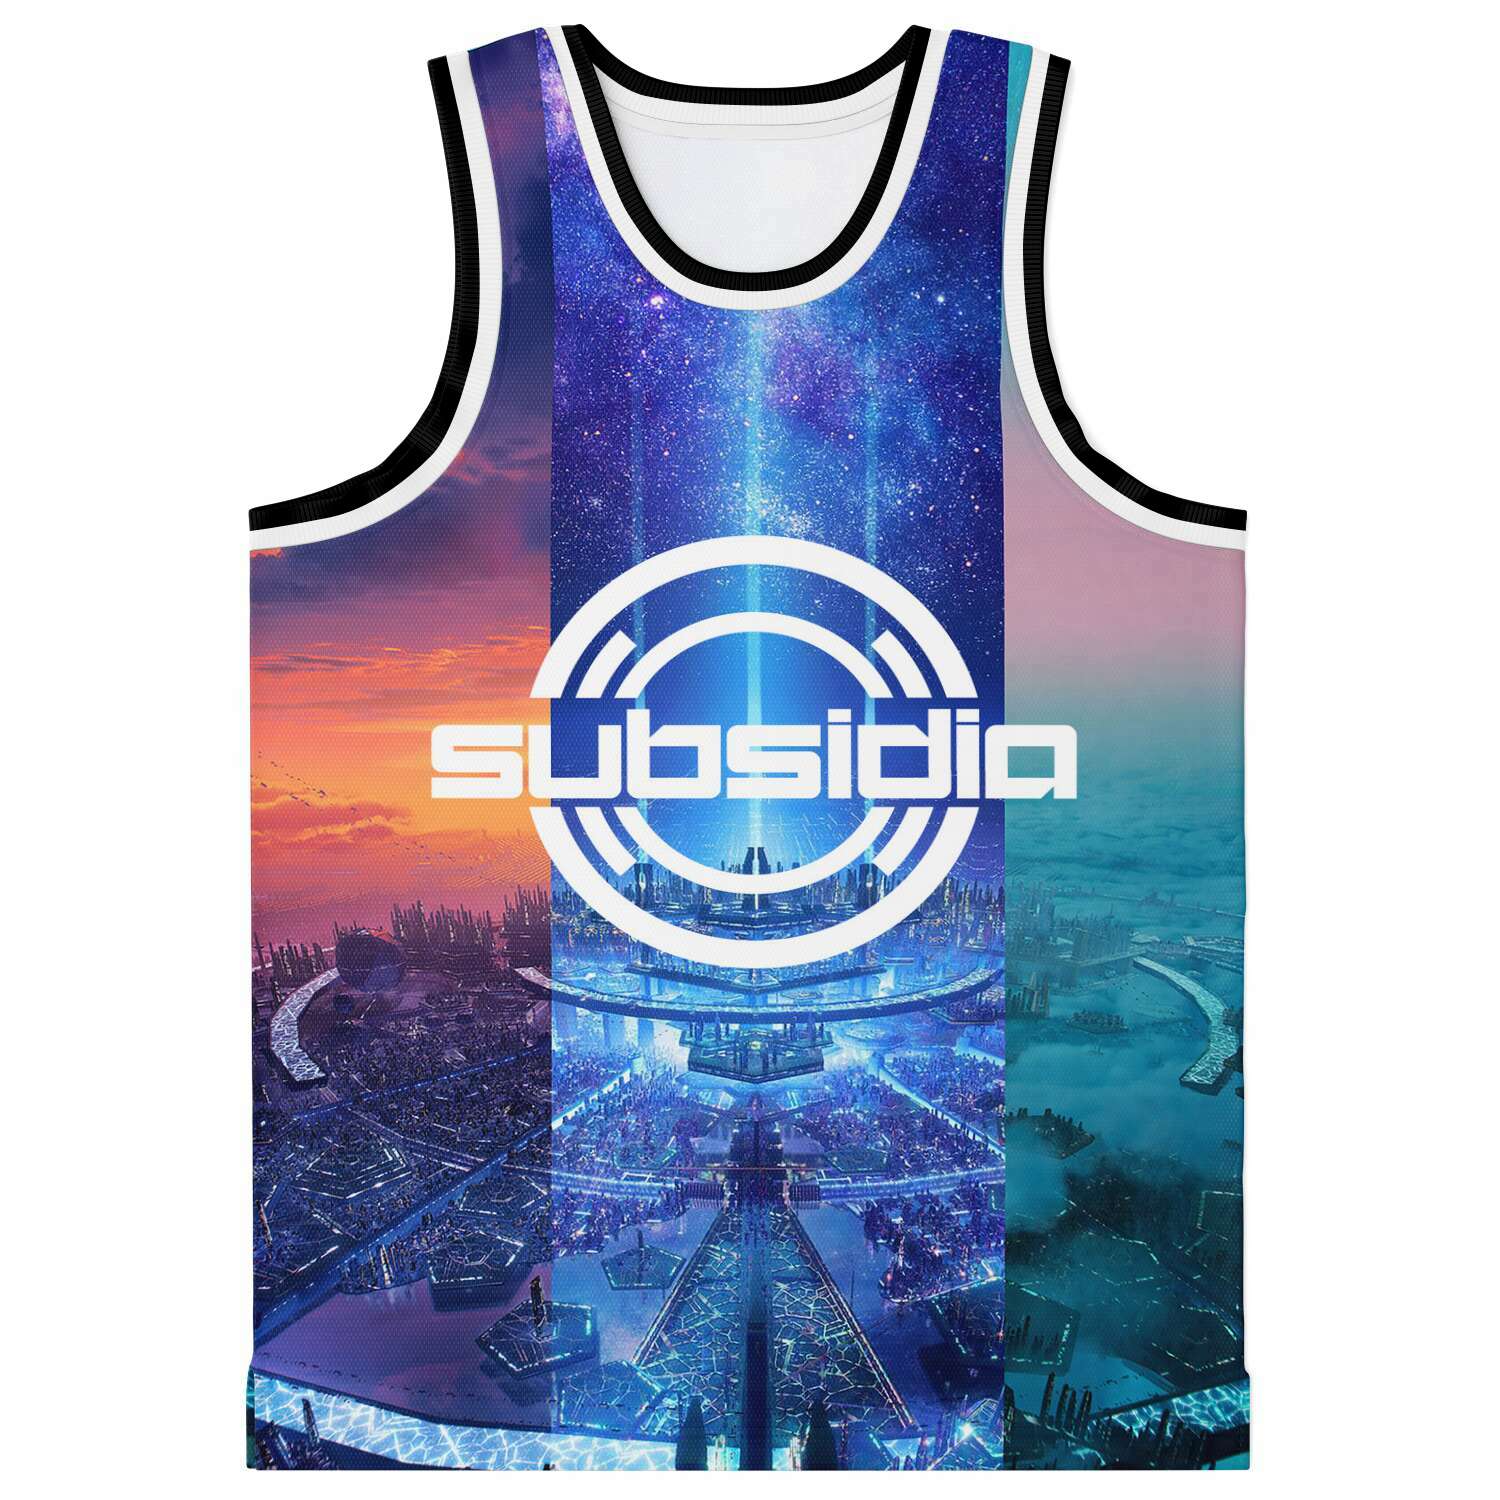 Excision - Subsidia Basketball jersey